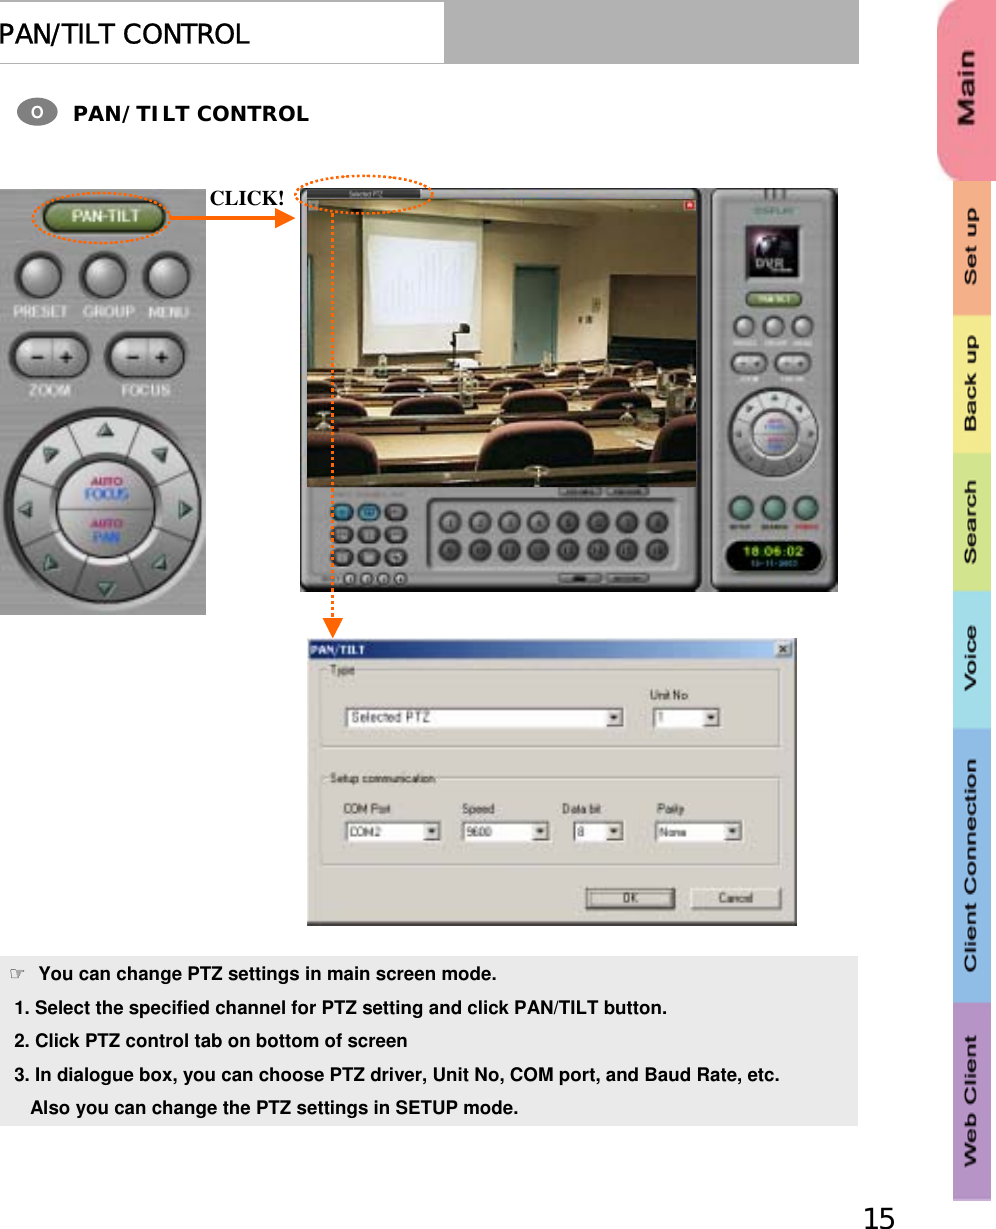 15PAN/TILT CONTROLPAN/TILT CONTROLO☞You can change PTZ settings in main screen mode.1. Select the specified channel for PTZ setting and click PAN/TILT button.2. Click PTZ control tab on bottom of screen3. In dialogue box, you can choose PTZ driver, Unit No, COM port, and Baud Rate, etc.Also you can change the PTZ settings in SETUP mode.CLICK!